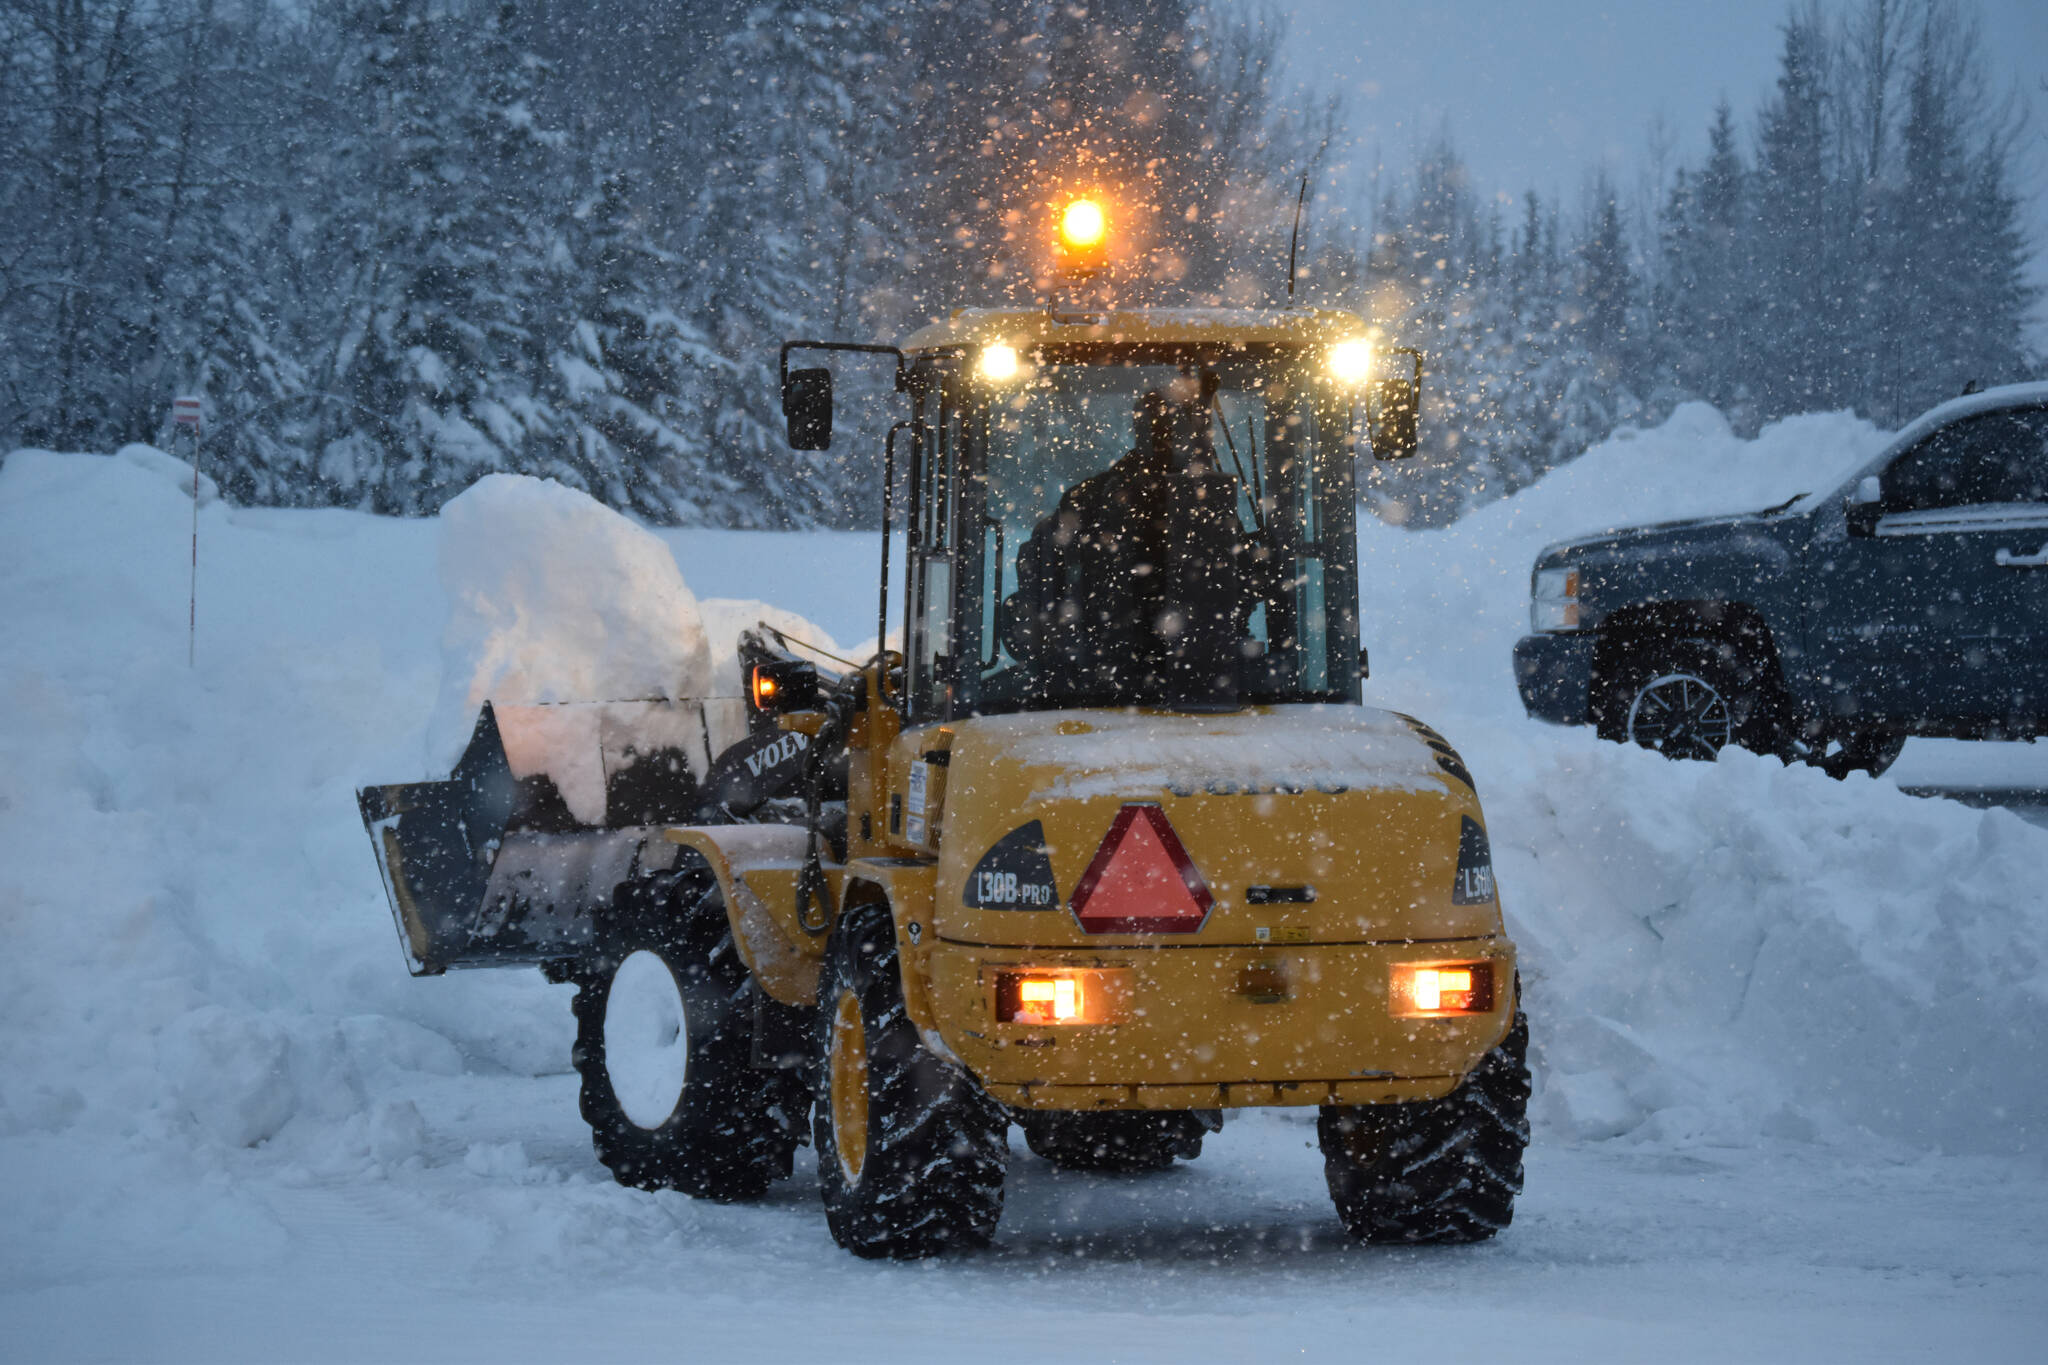 Snow is cleared from the road during the start of another major snowfall on Wednesday, Dec. 14, 2022, outside the Peninsula Clarion offices in Kenai, Alaska. (Jake Dye/Peninsula Clarion)